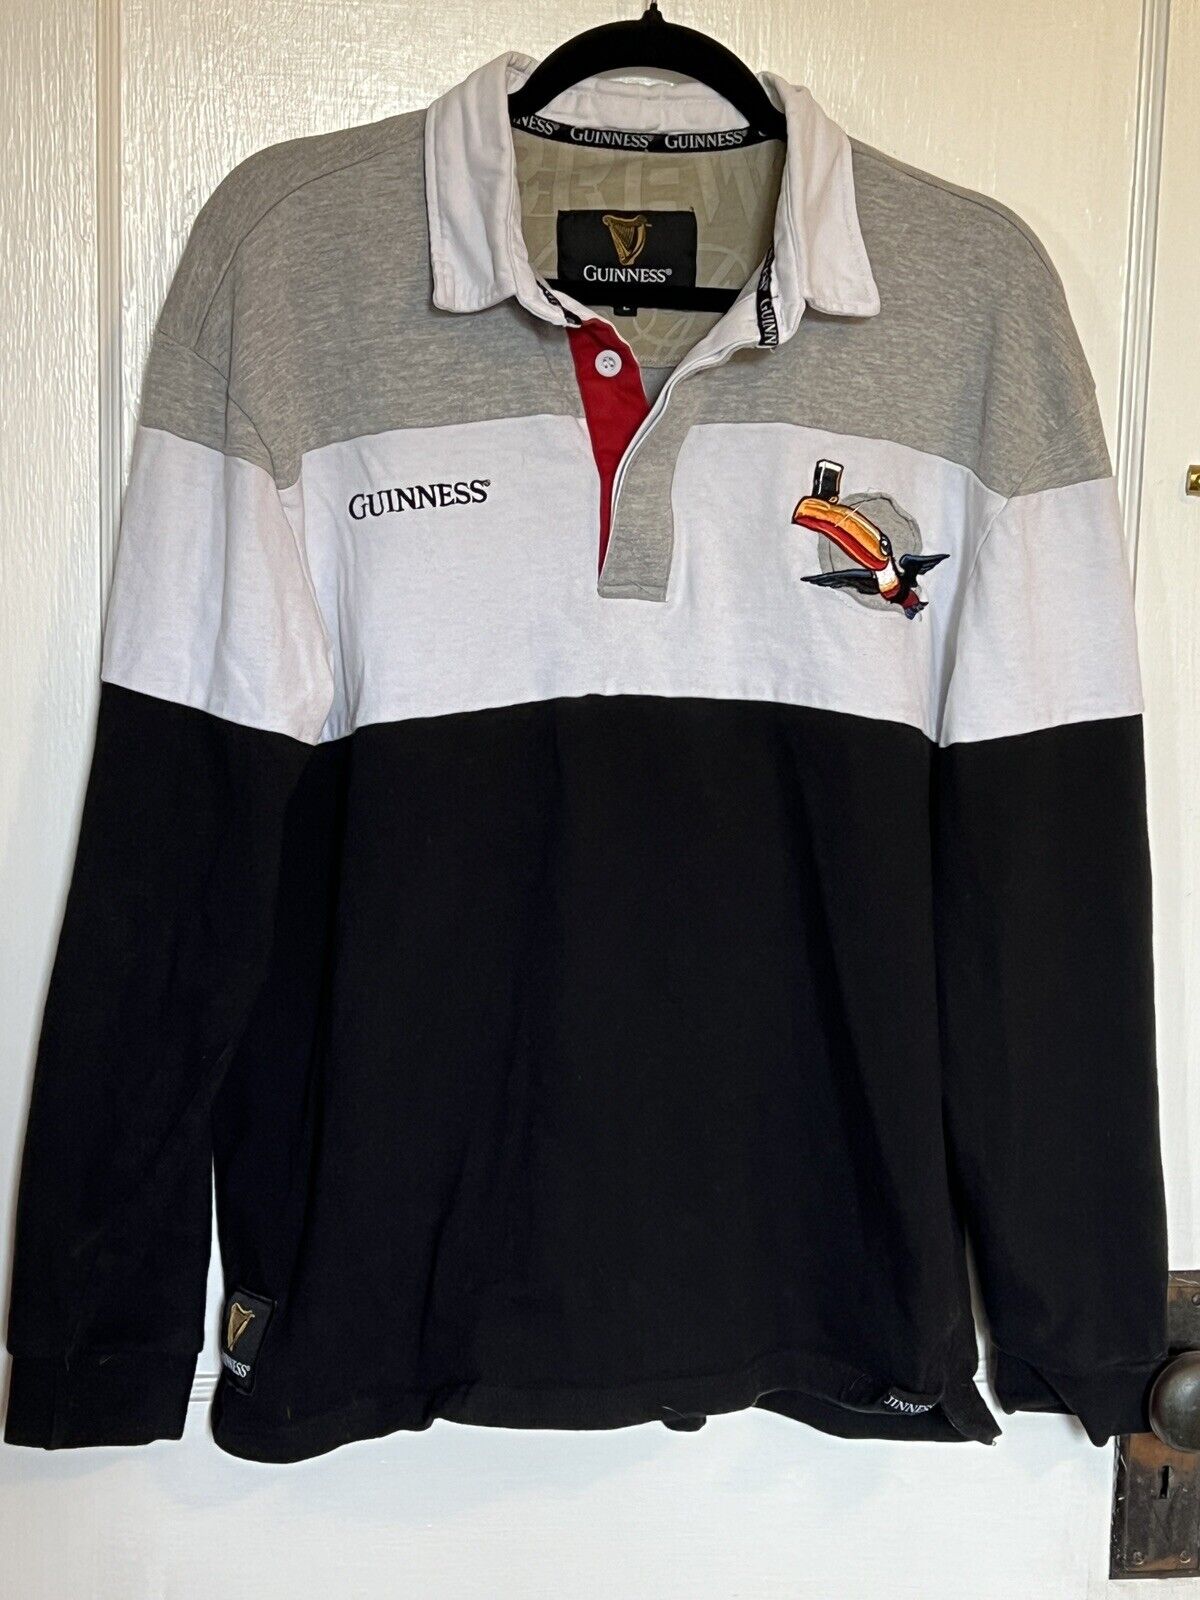 GUINNESS BLACK WHITE GRAY TOUCAN LOGO RUGBY JERSEY MAN\'S LARGE